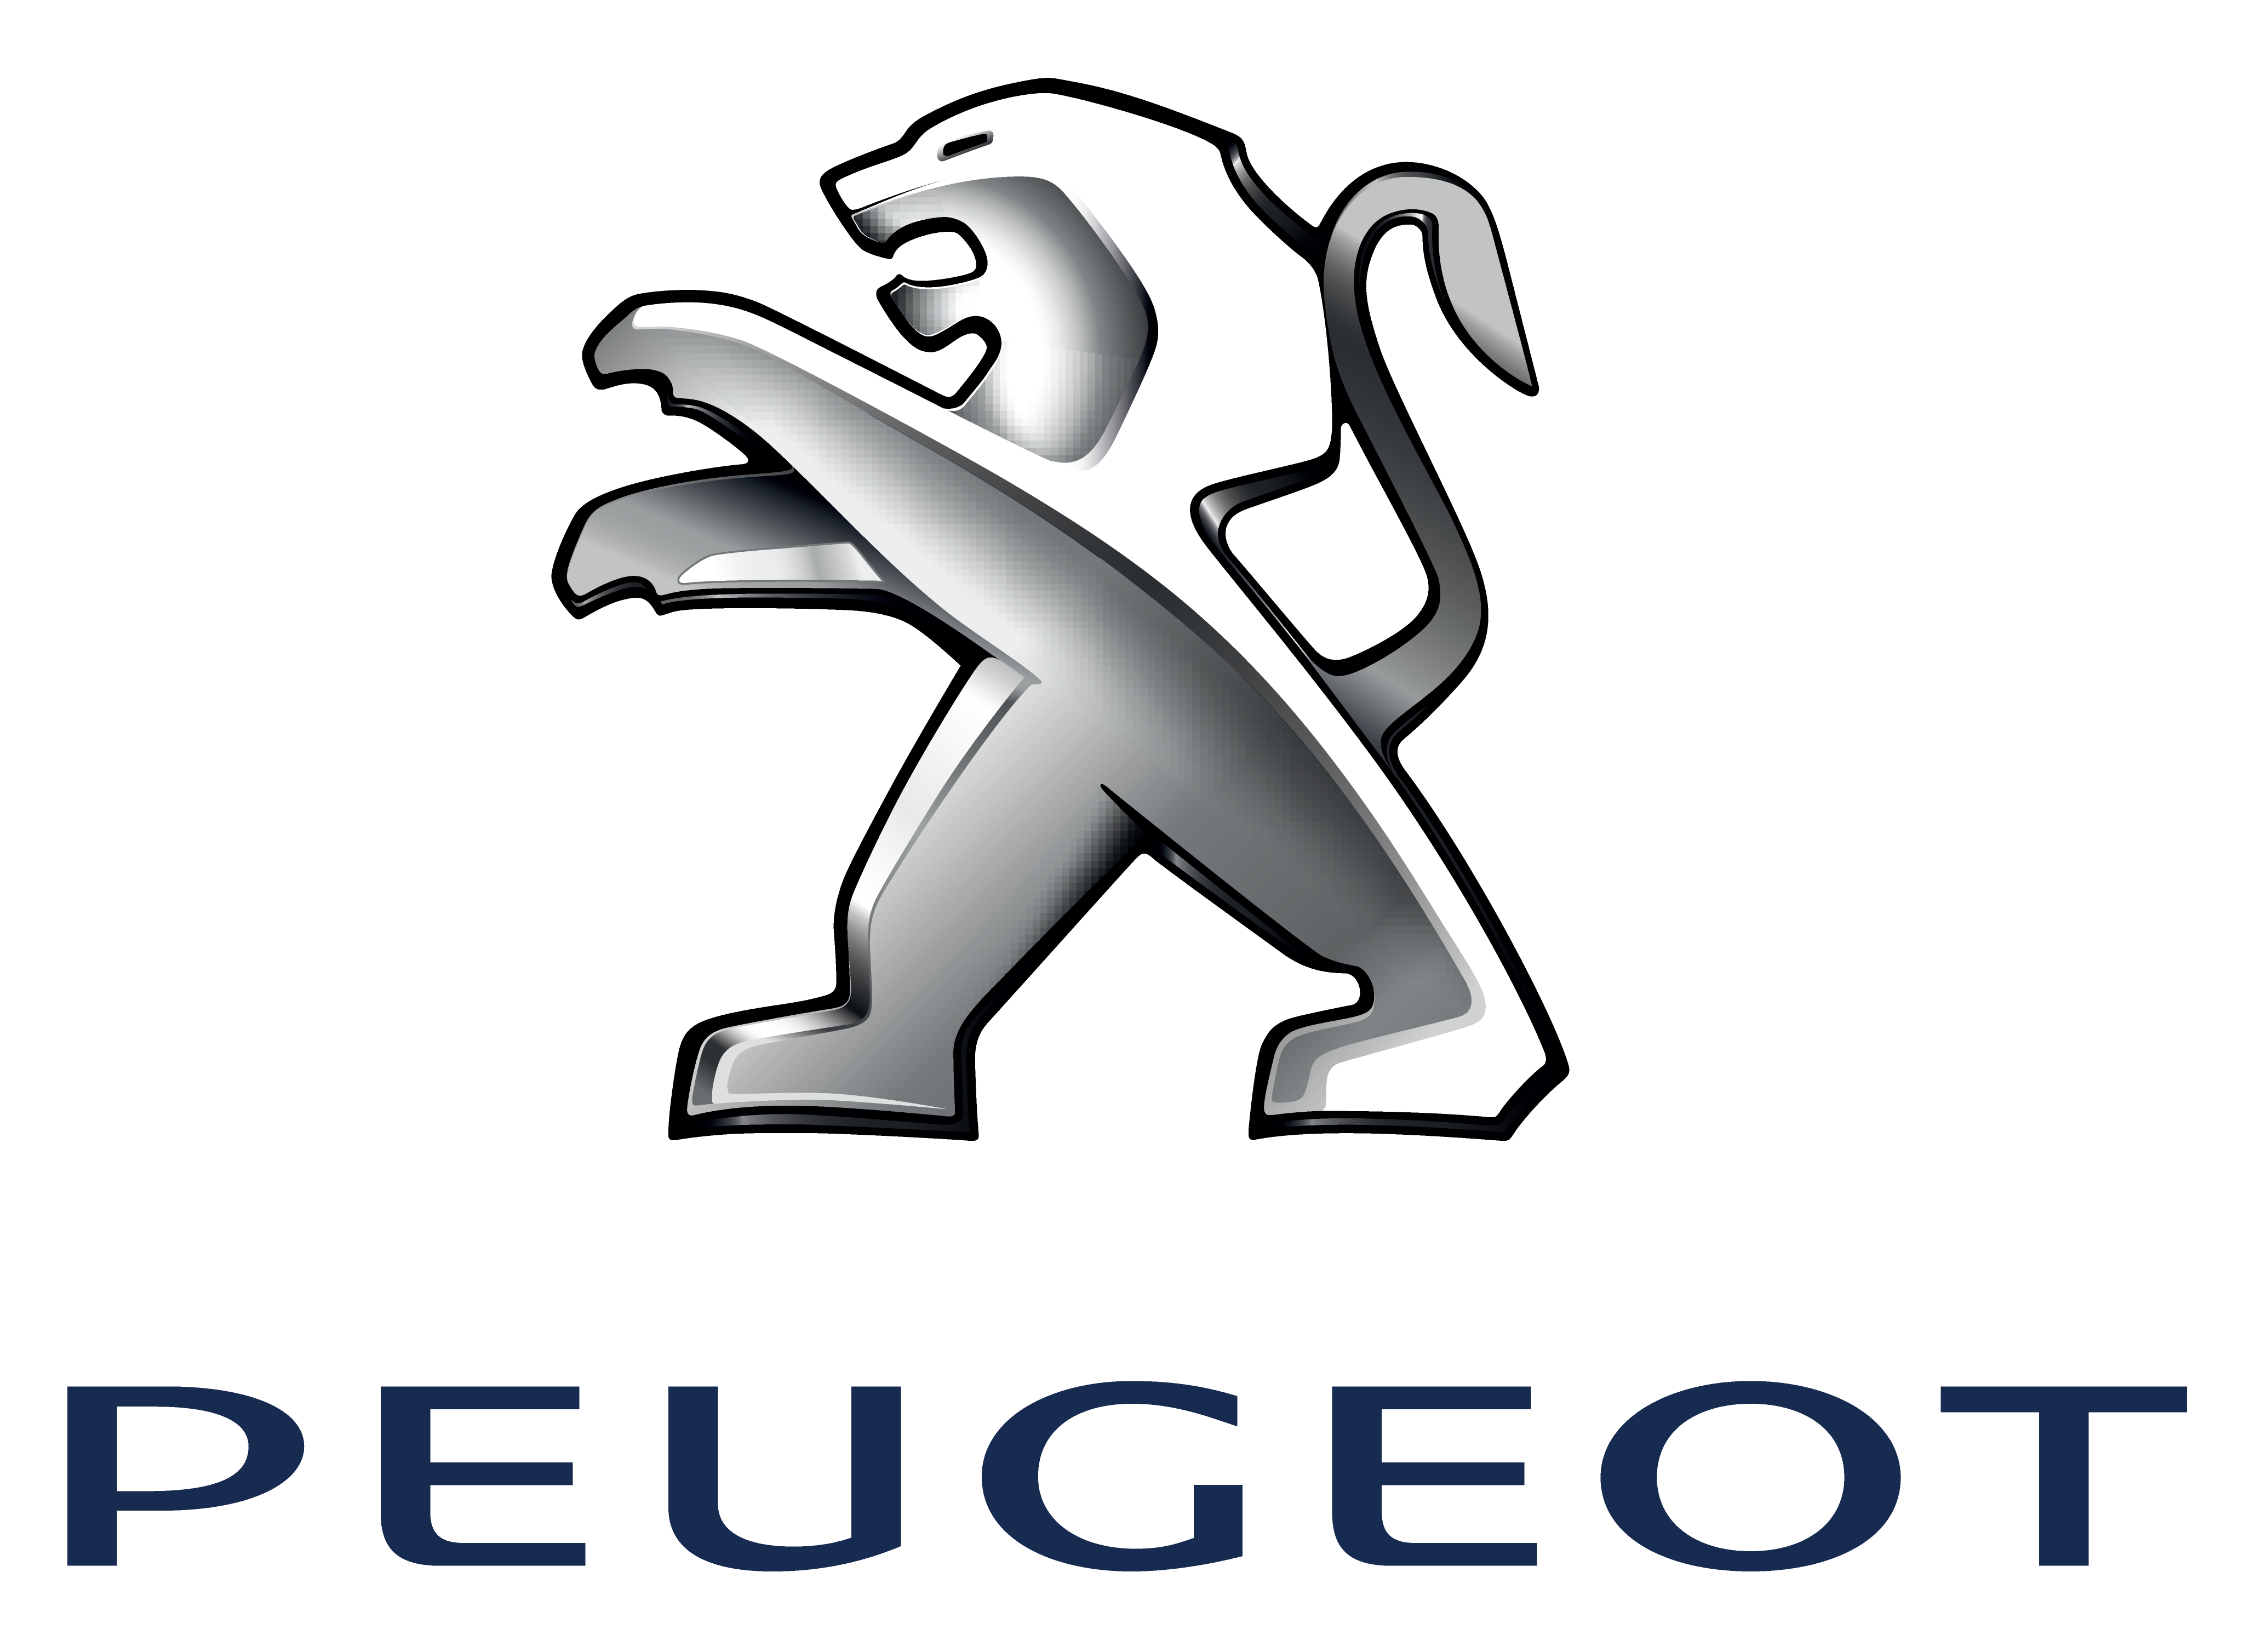 Peugeot Logo, Hd Png, Meaning